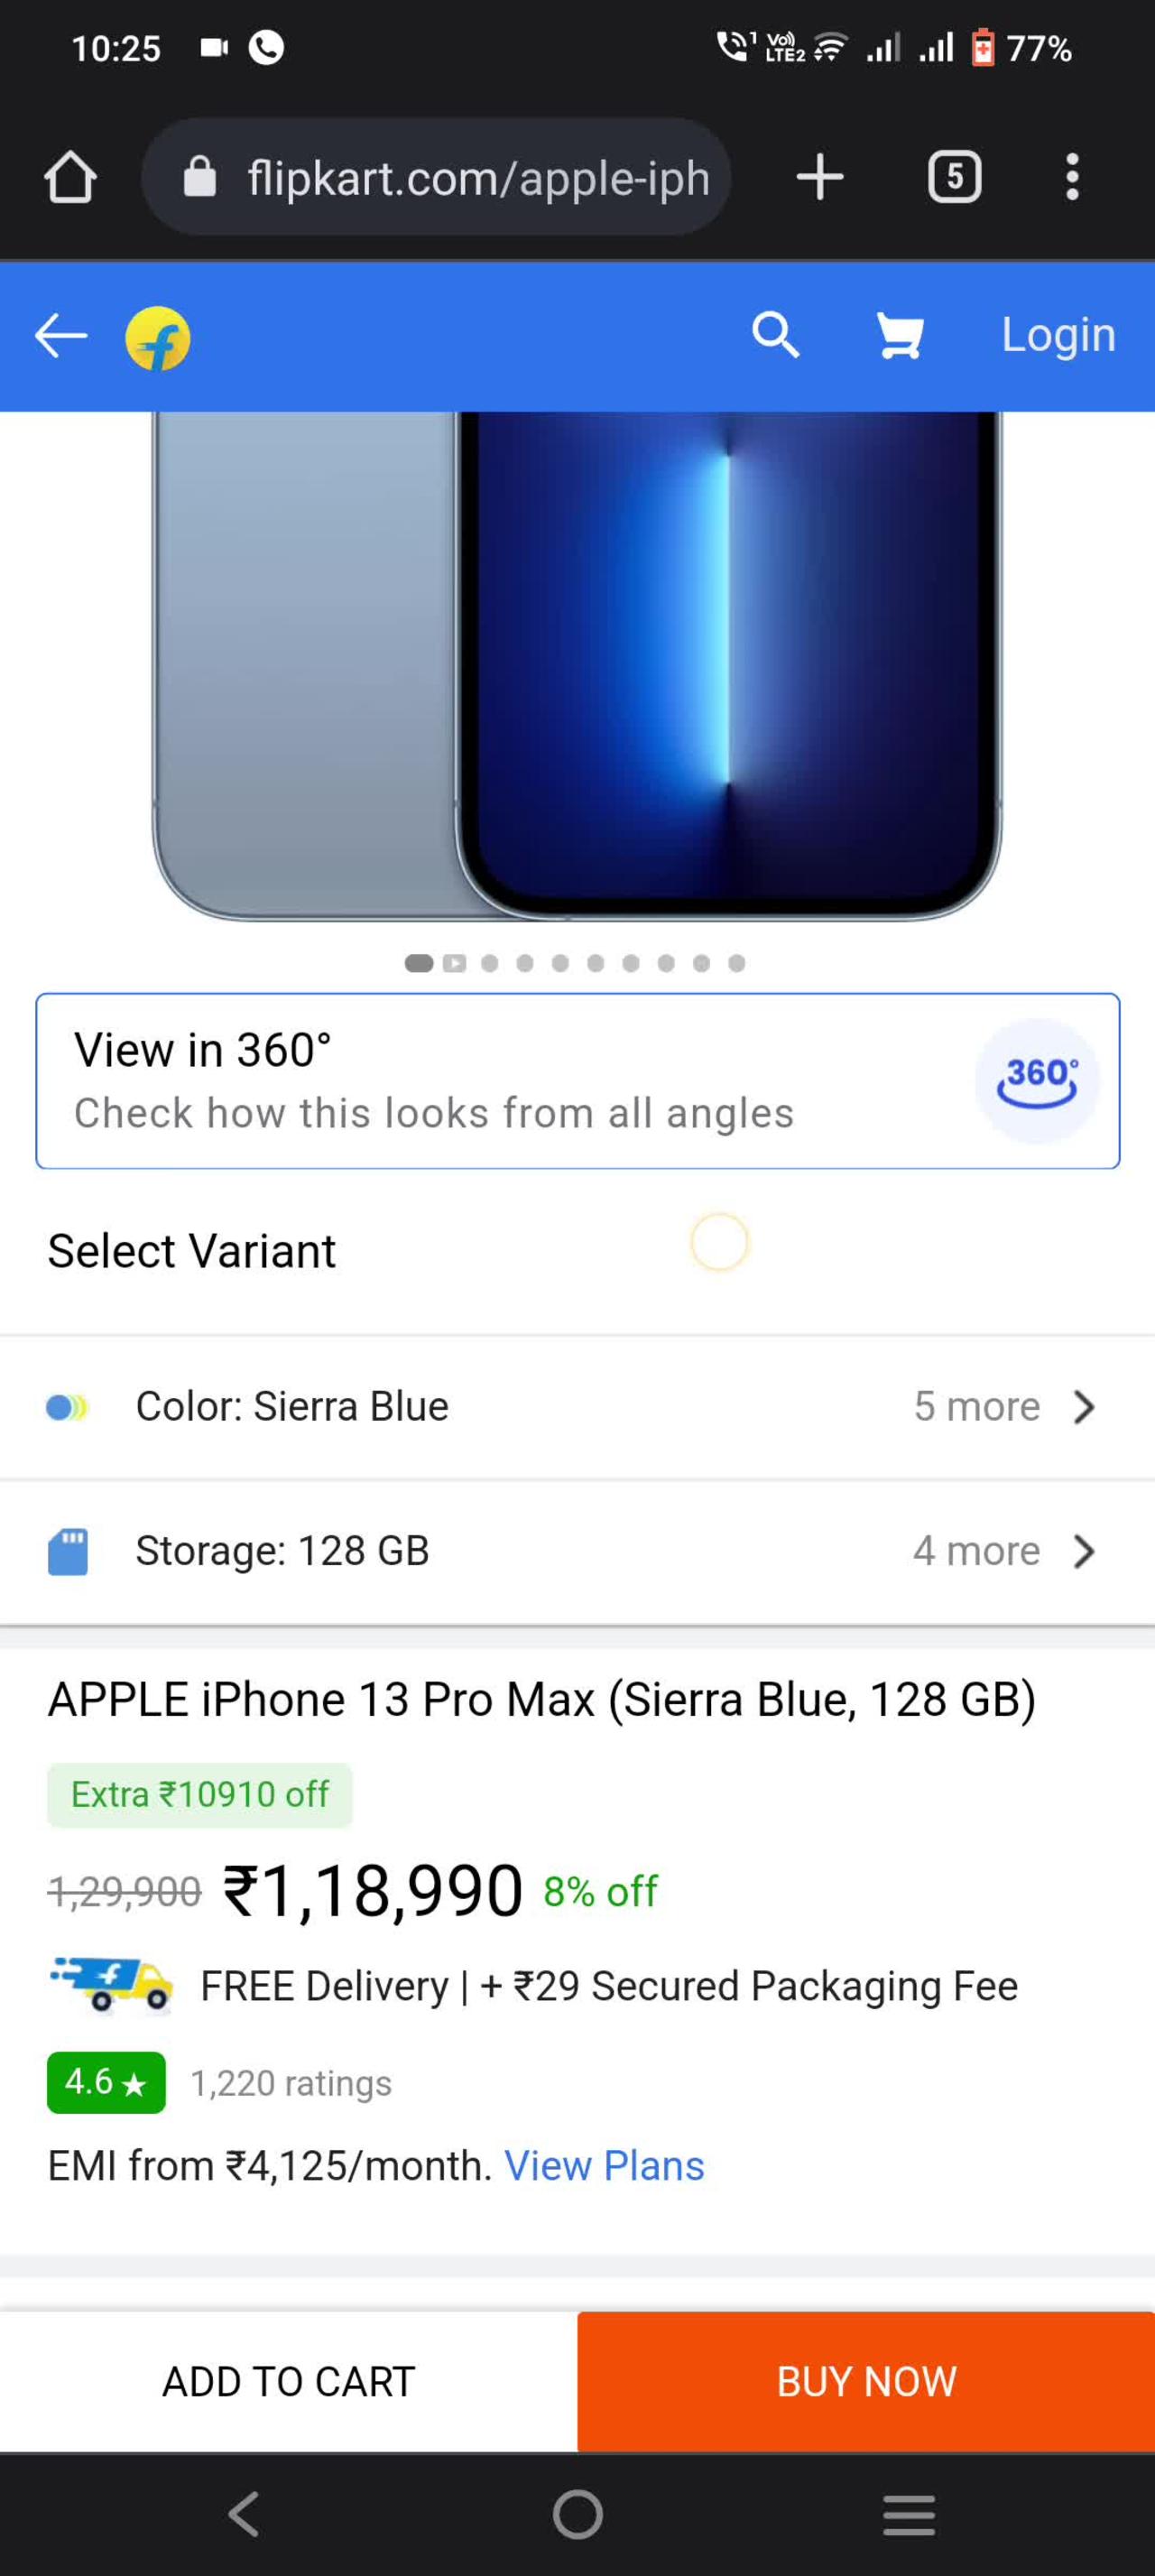 Iphone 13 pro max 8% off on Flipkart limited period offer order it now link in the discription